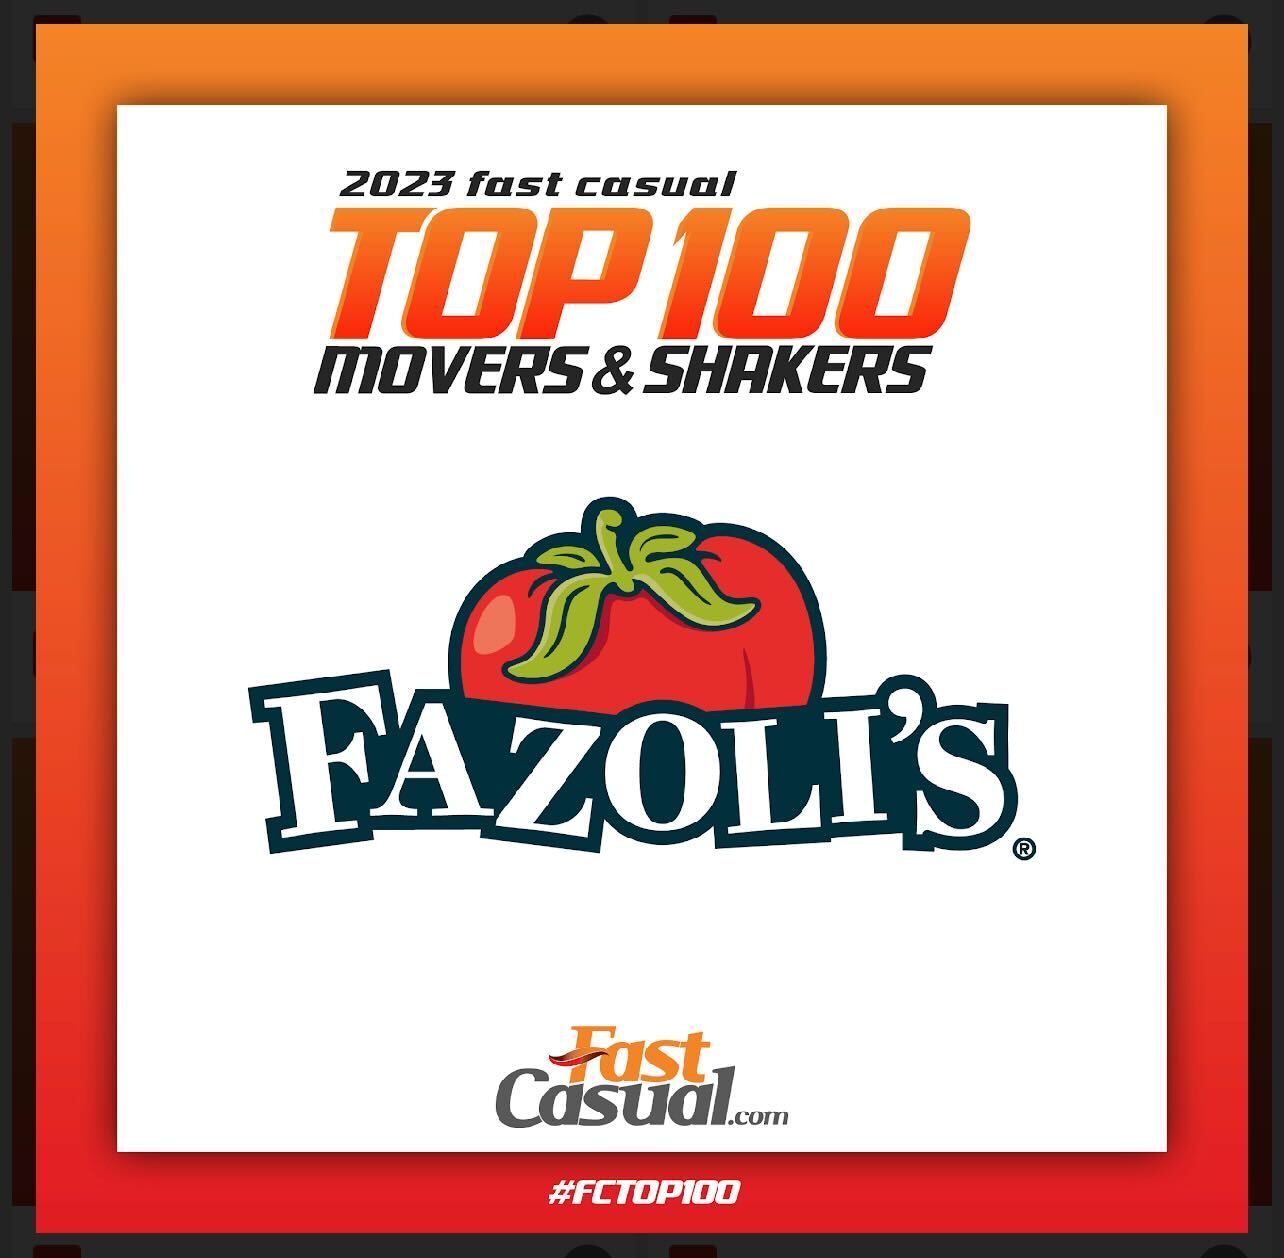 Fazoli's Earns a Top Spot on Fast Casual's 2023 Top 100 Movers & Shakers List